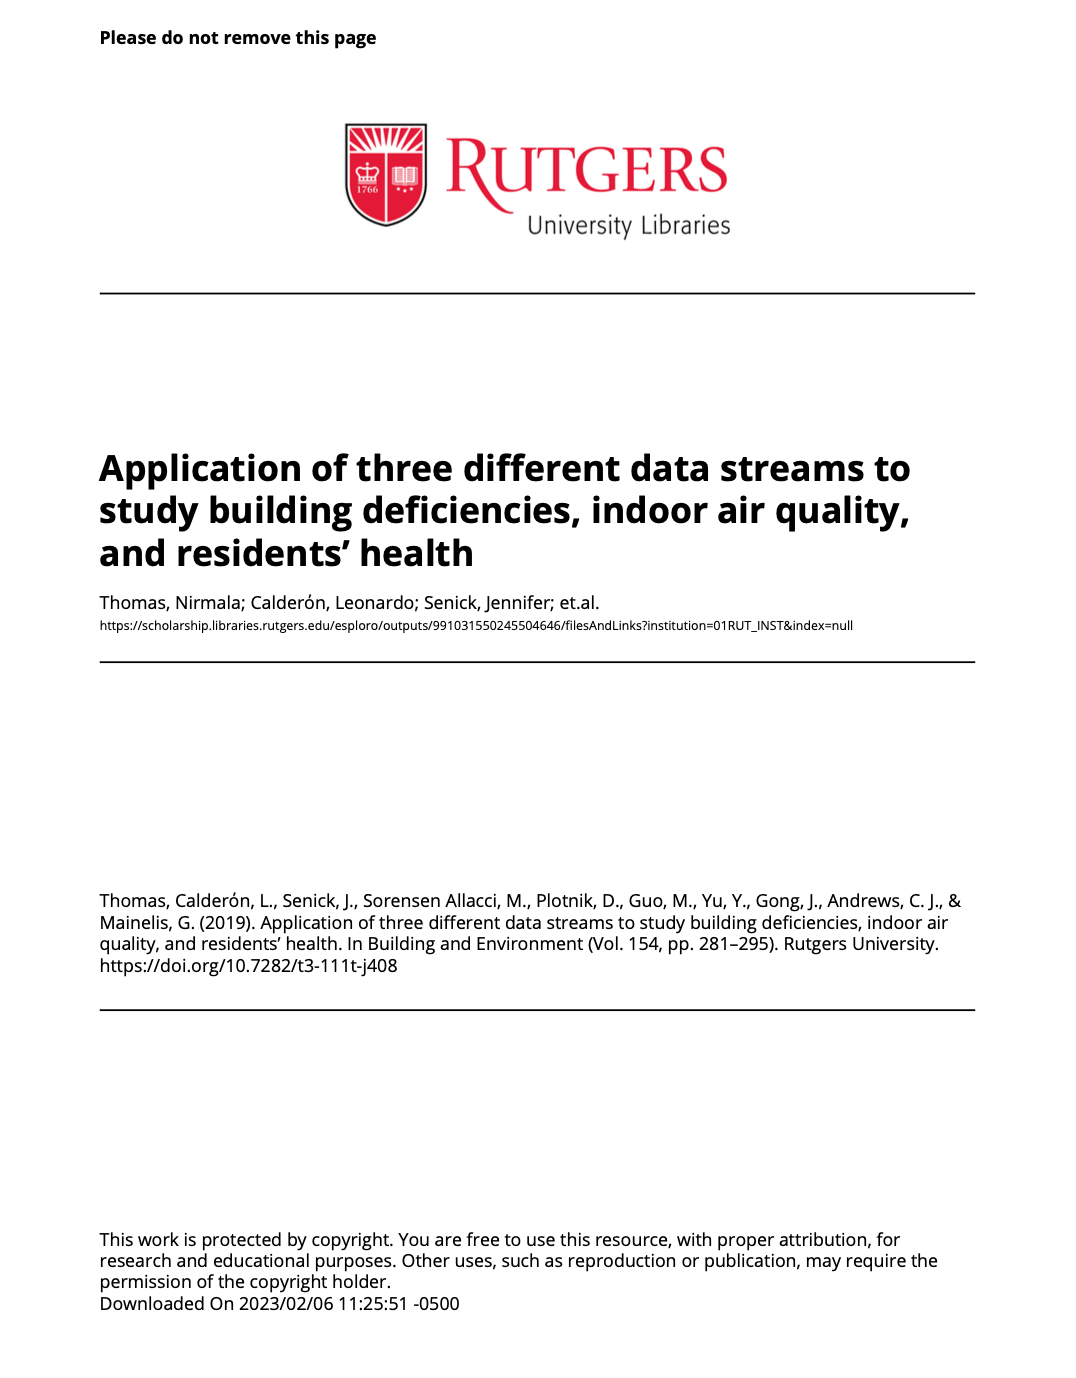 Application of three different data streams to study building deficiencies, indoor air quality, and residents’ health